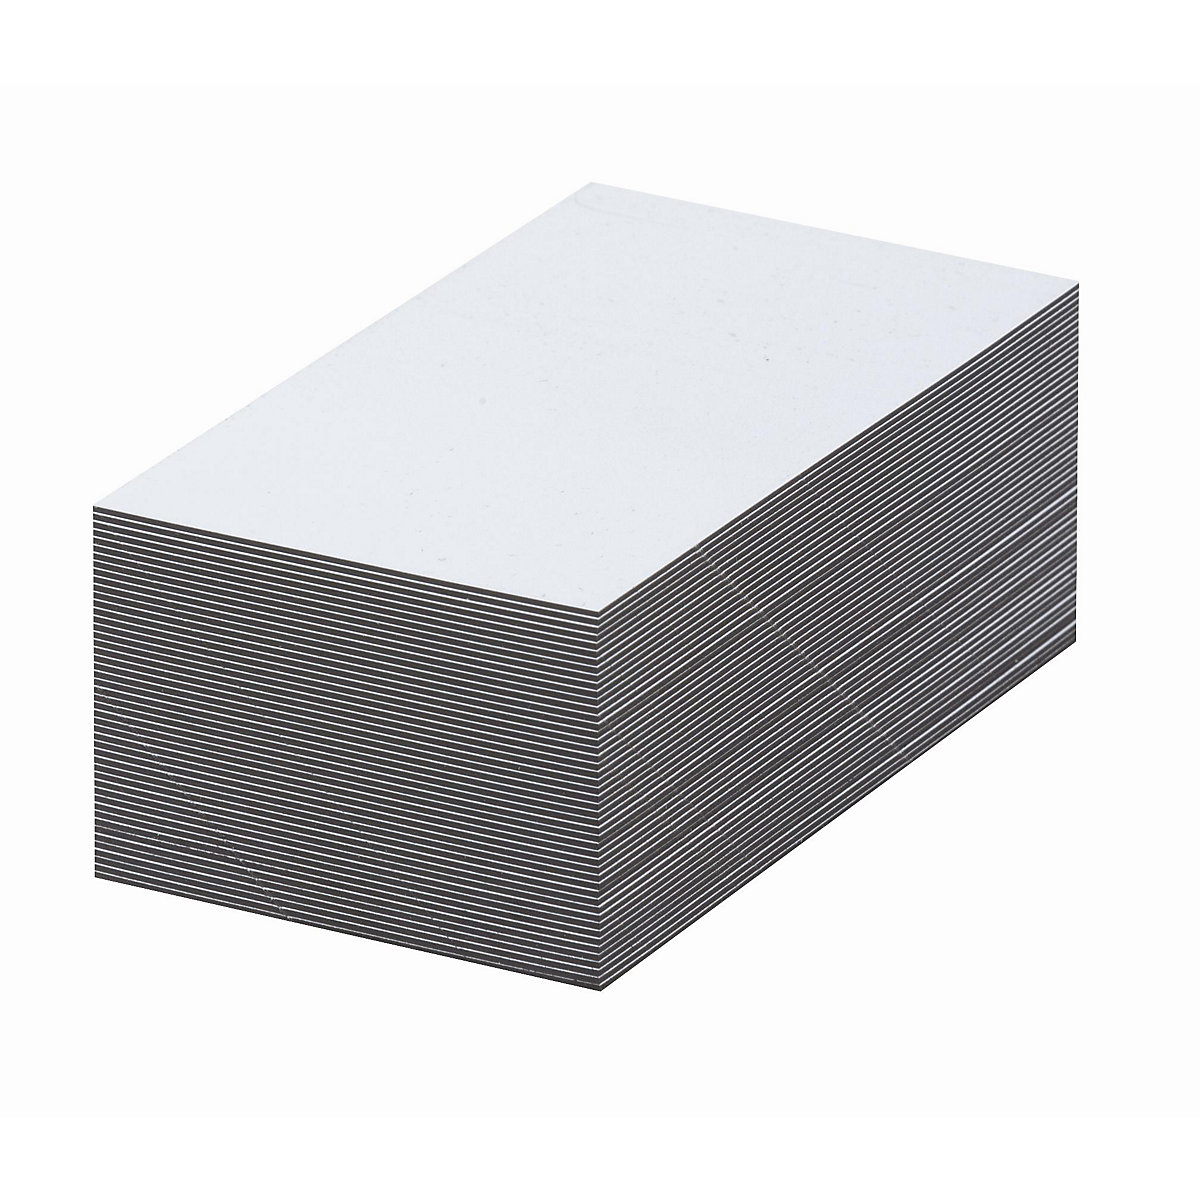 Magnetic storage labels, white, HxW 80 x 100 mm, pack of 100-9